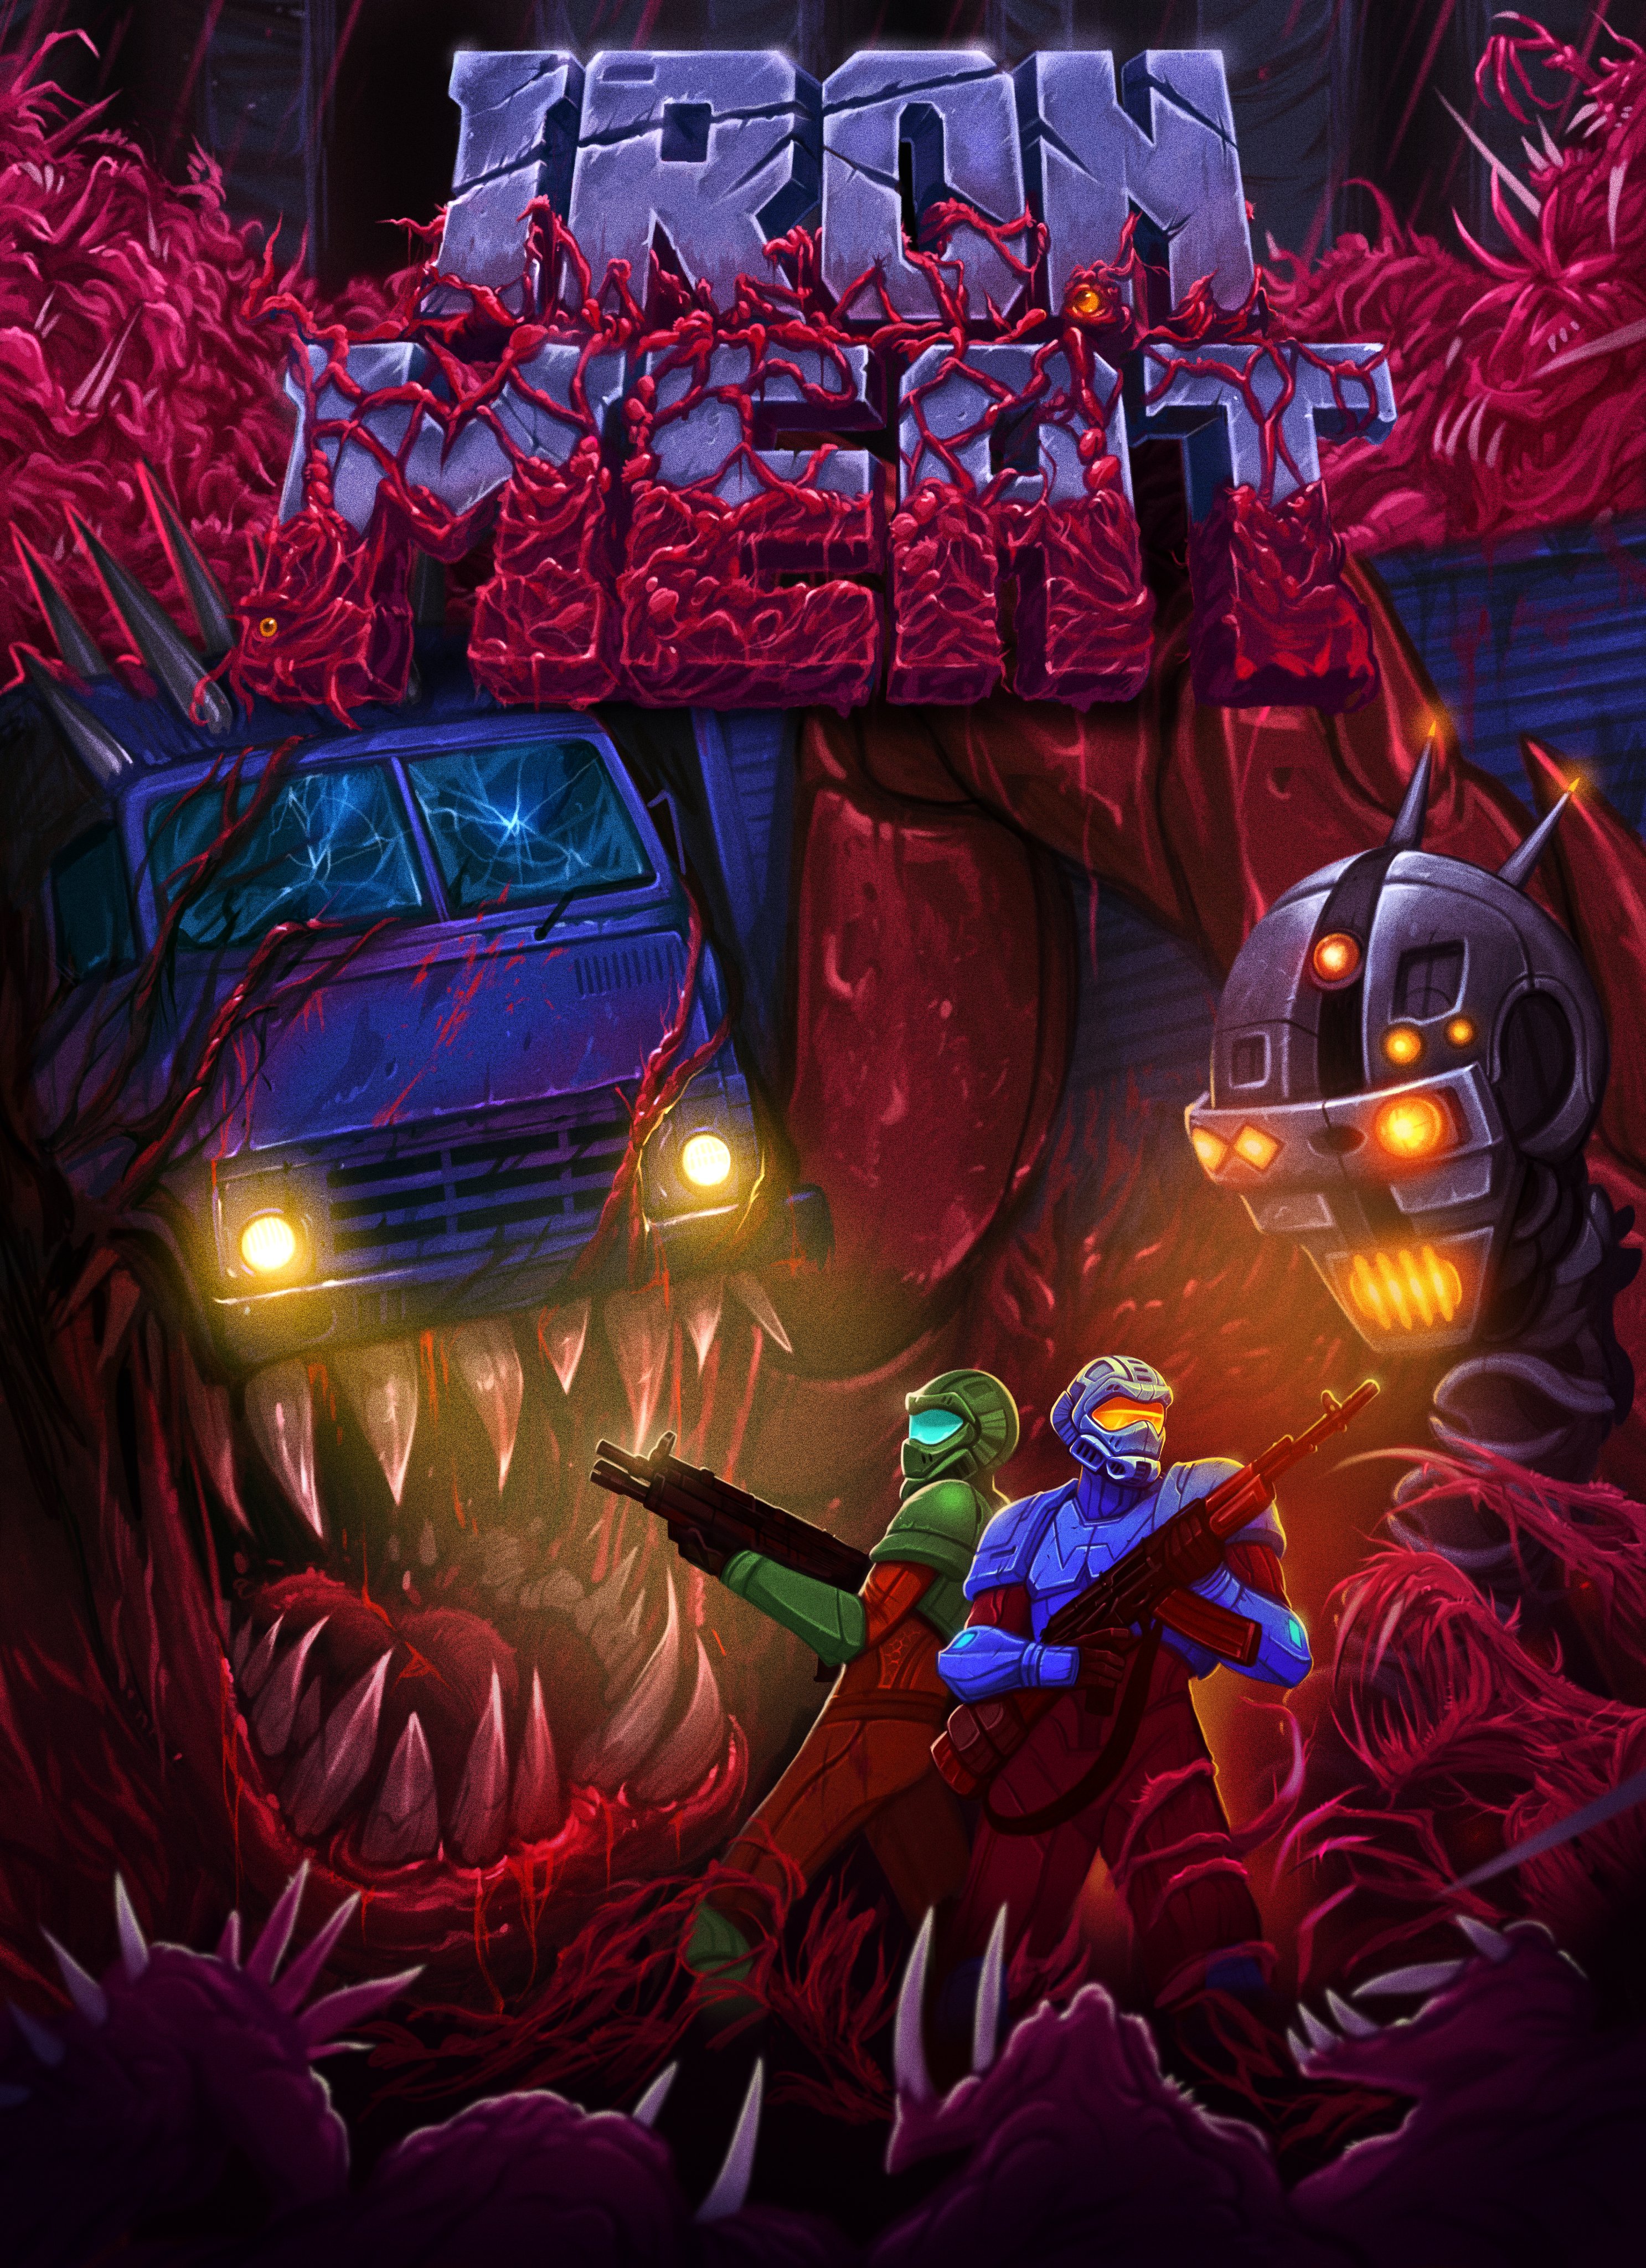 Meat game. Iron meat game. Iron meat арт. Айрон сайт игра. Аркадные игры.